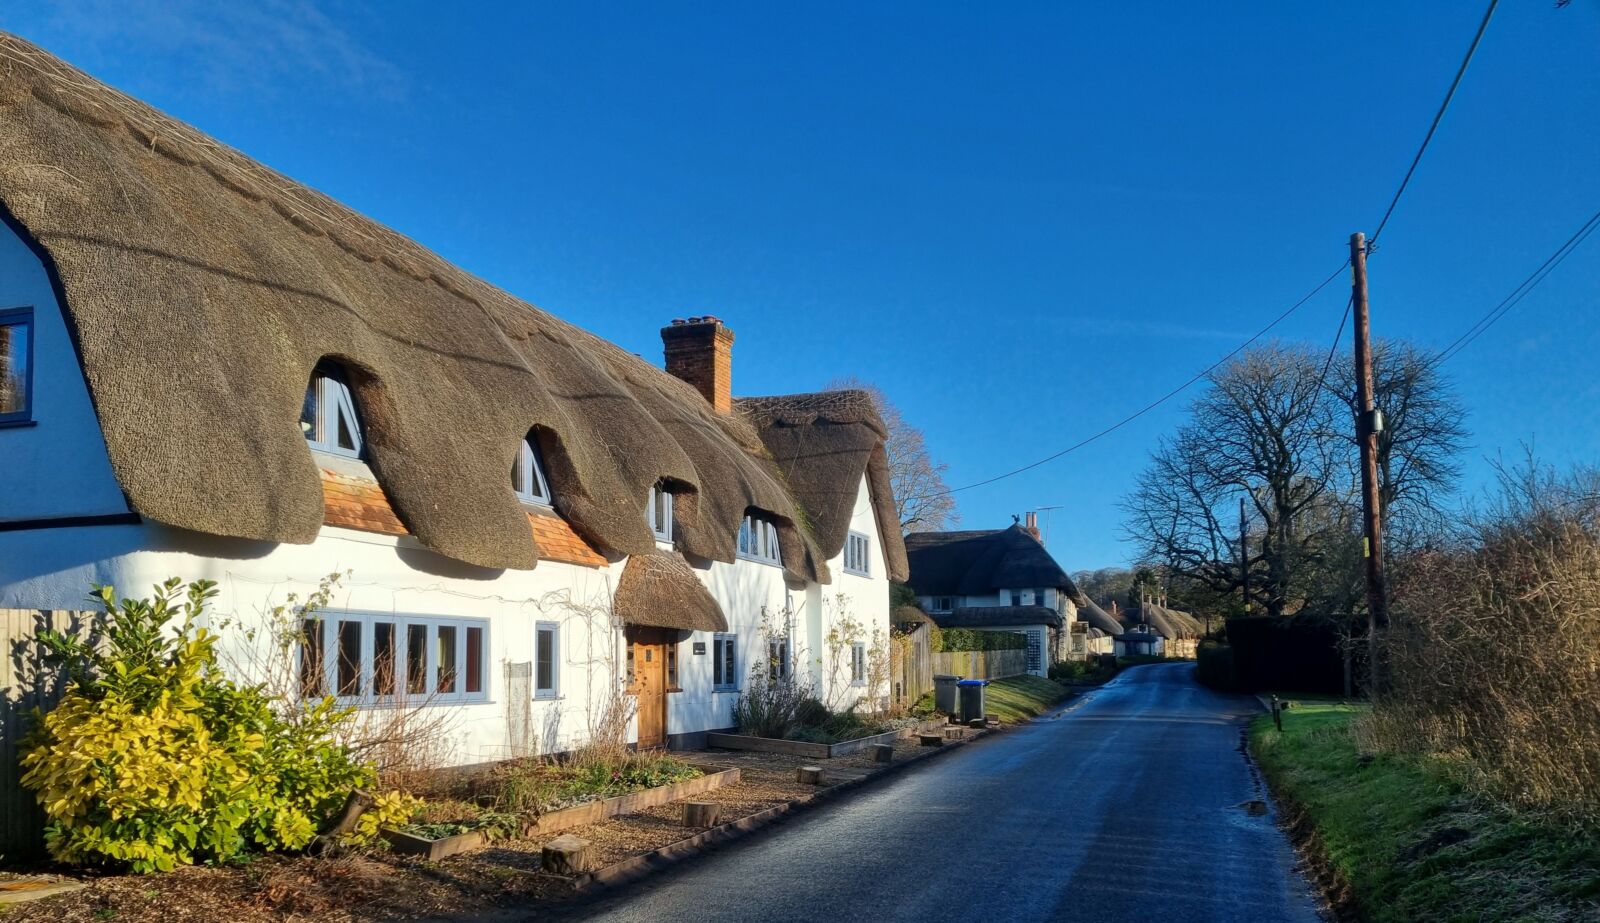 A row of houses with thatched roof